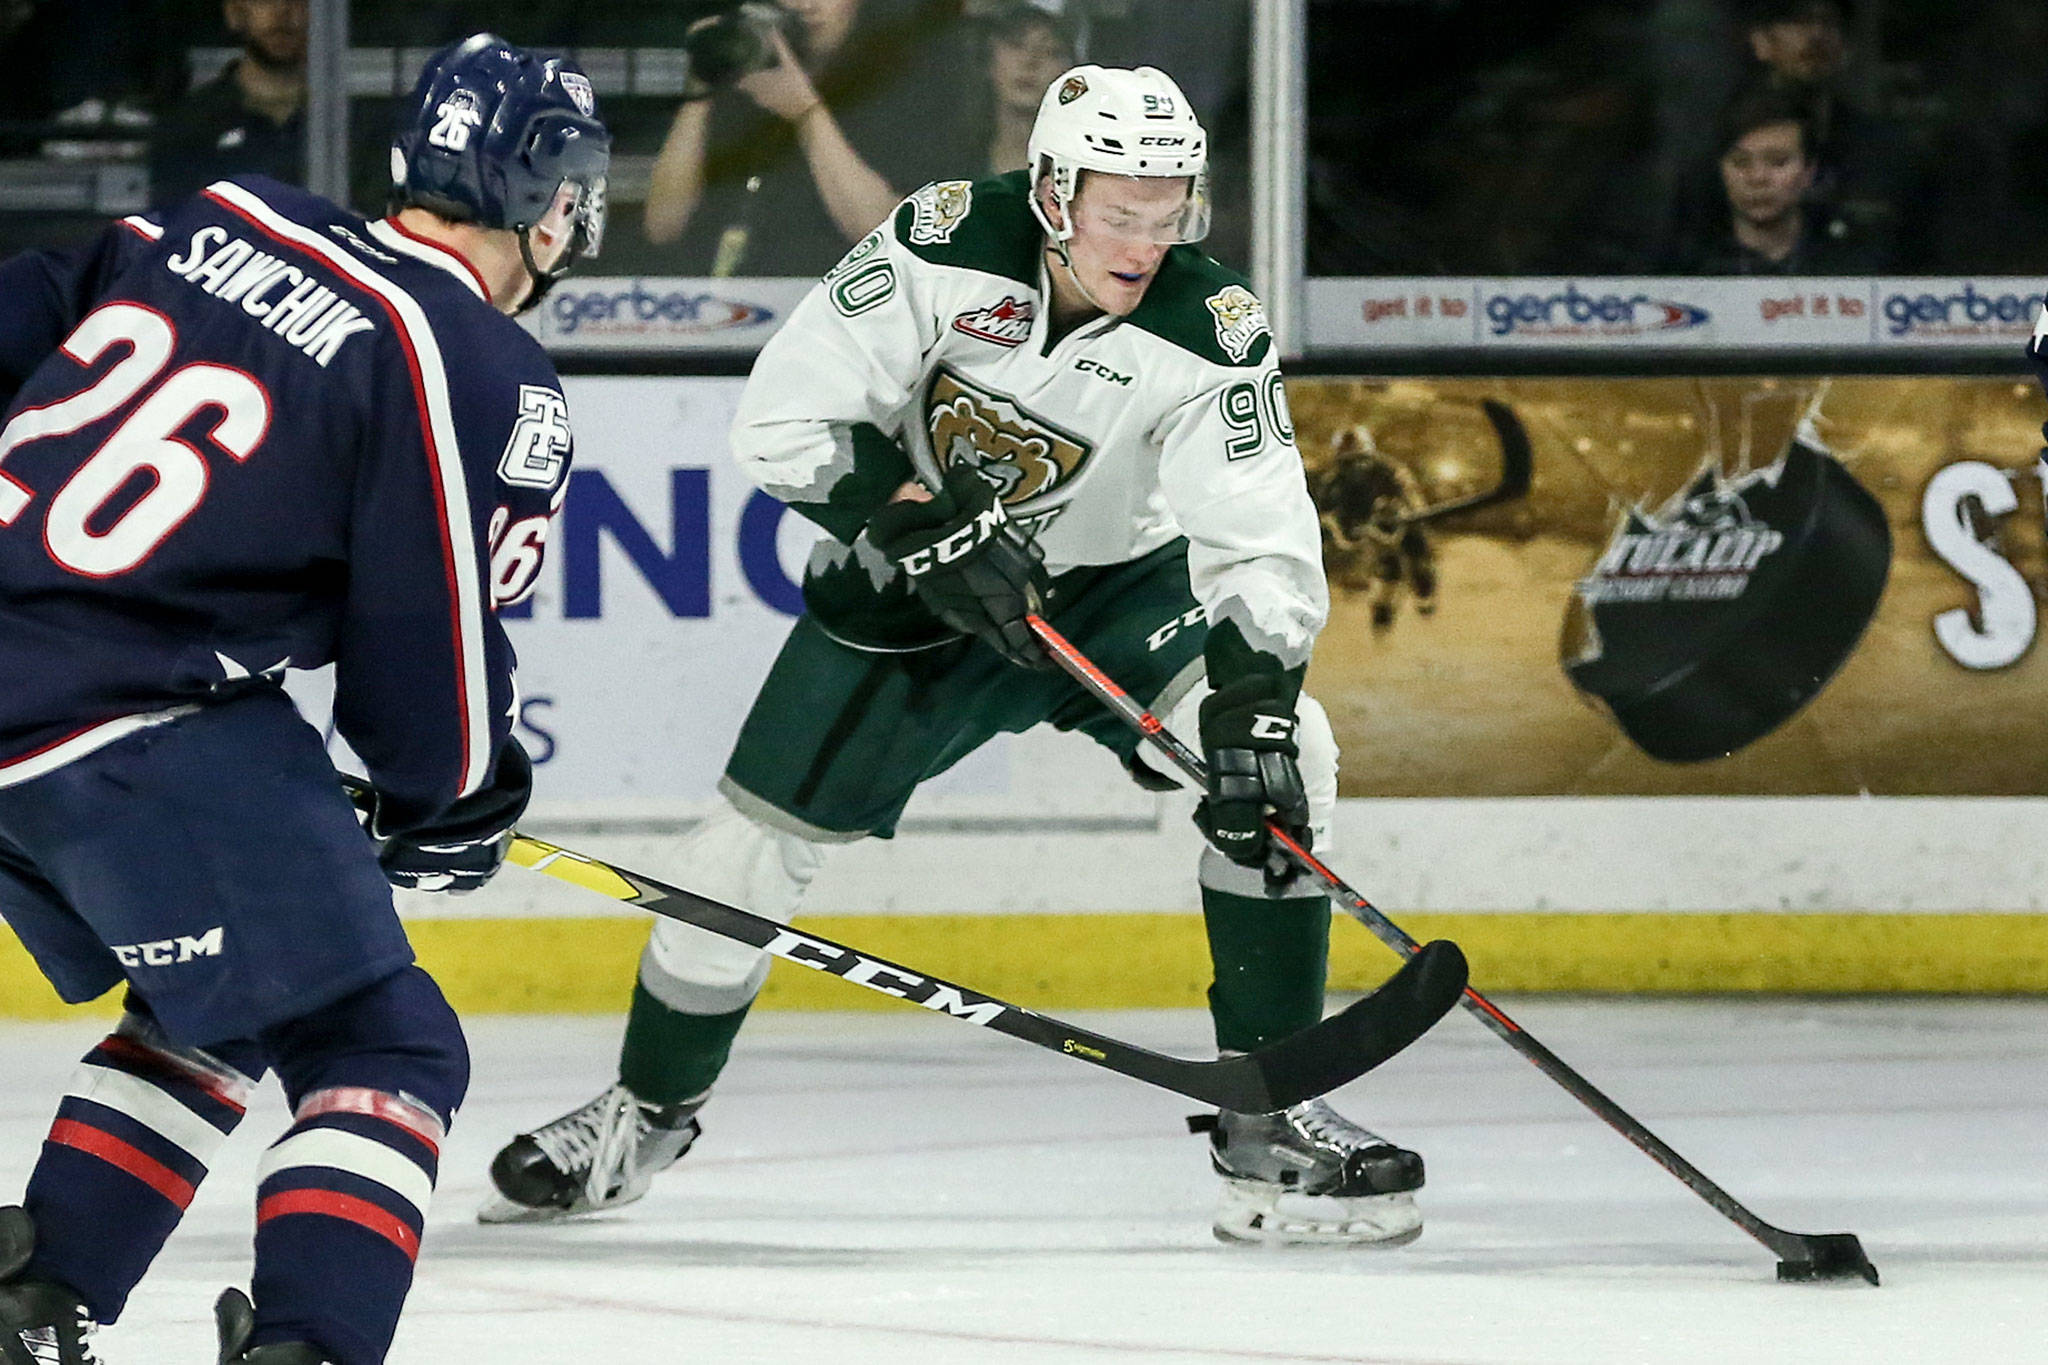 Silvertips forward Robbie Holmes controls the puck during Game 2 of a first-round playoff series against Tri-City on March 23, 2019, at Angel of the Winds Arena in Everett. (Kevin Clark / The Herald)